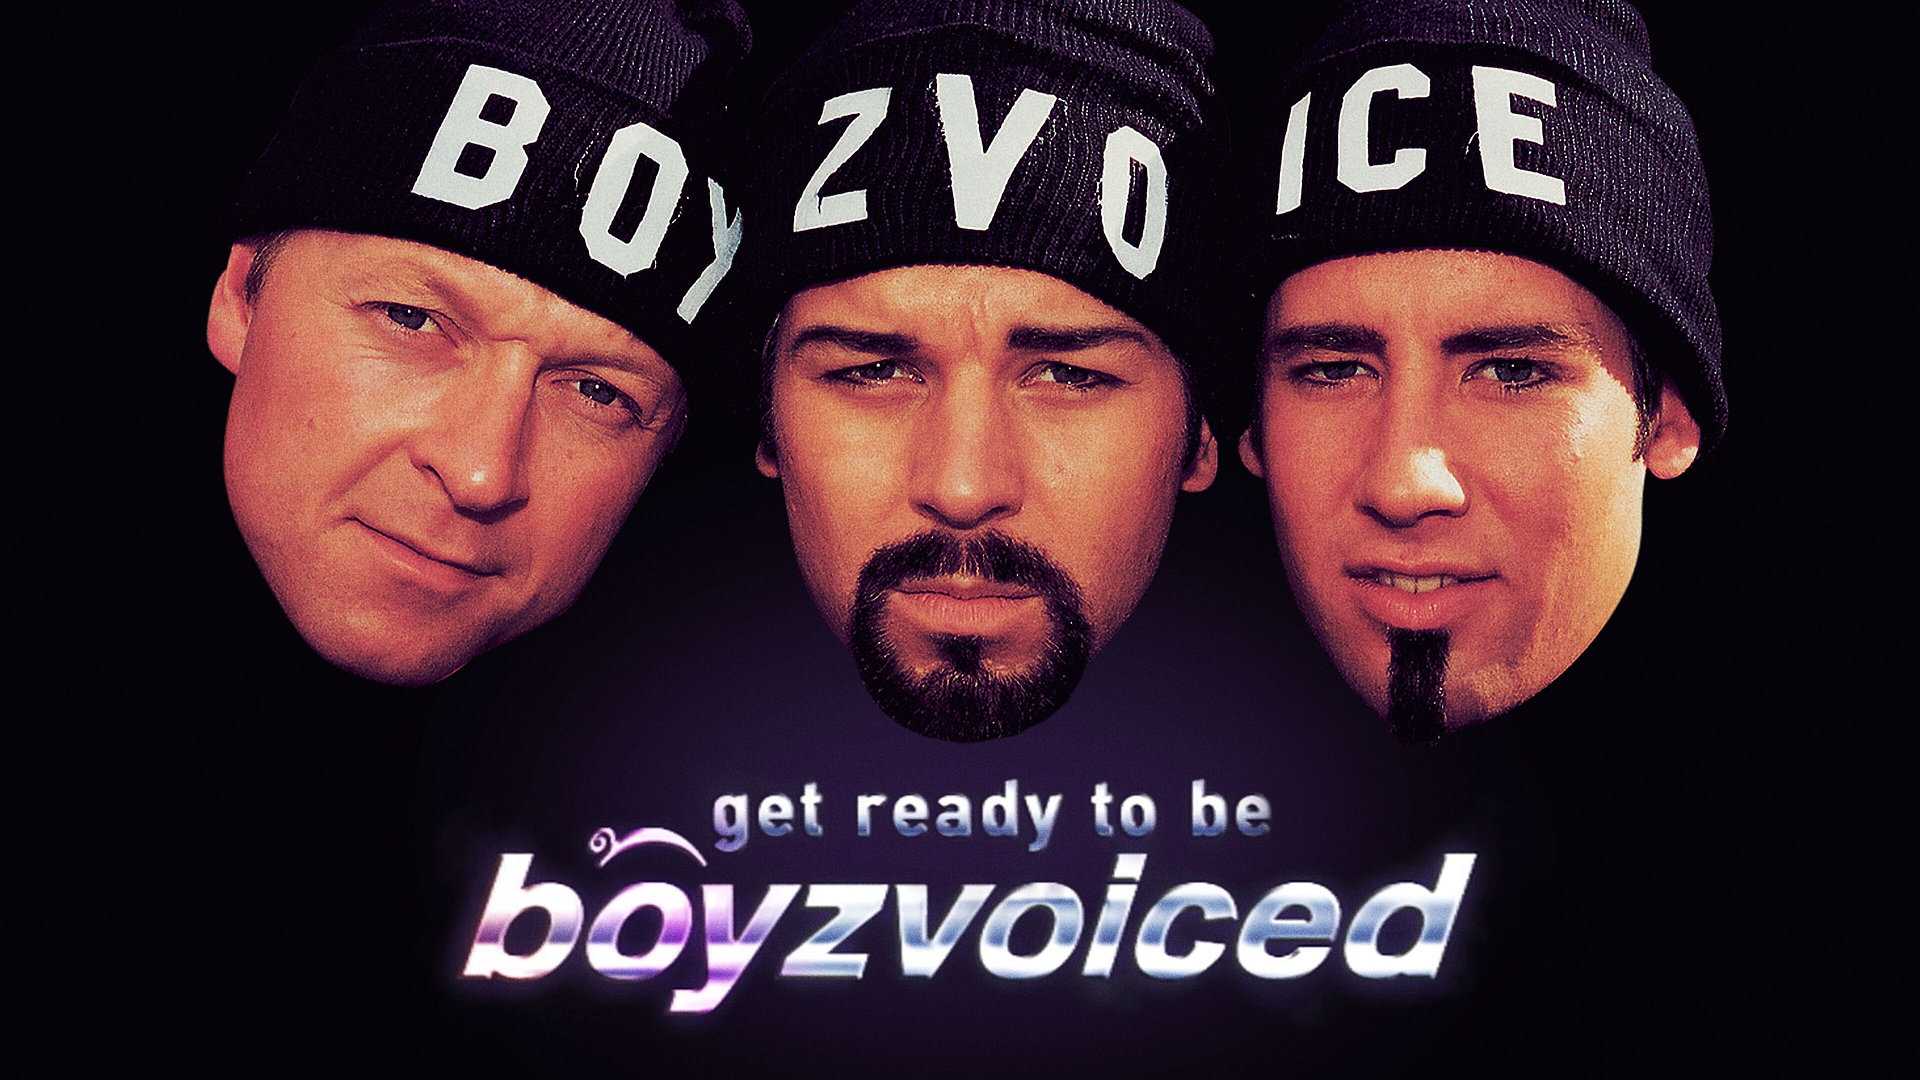 Get ready to be boyzvoiced